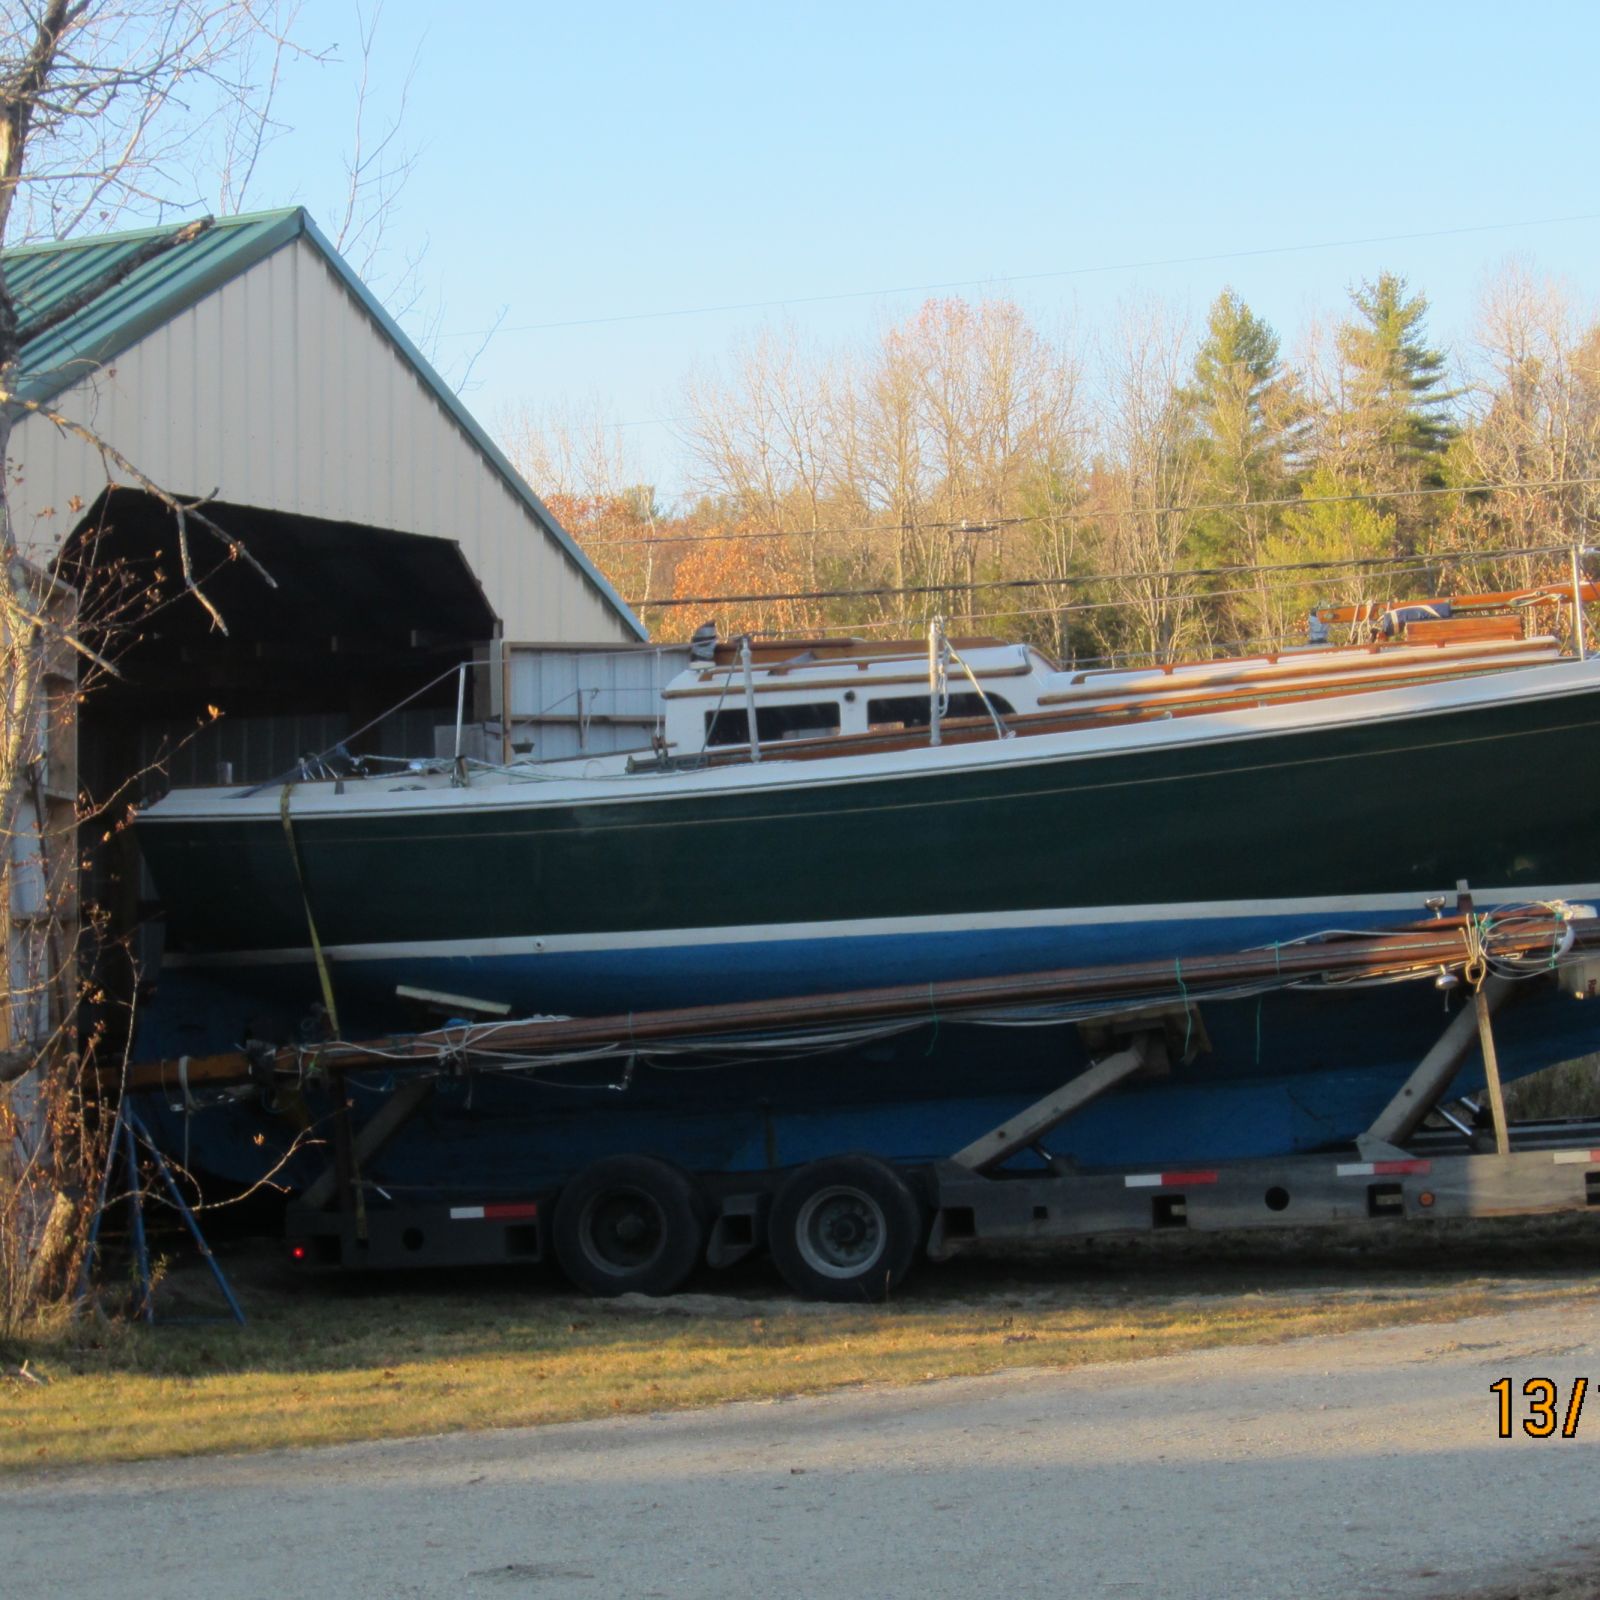 Morse Boatbuilders - LadyBen Classic Wooden Boats for Sale